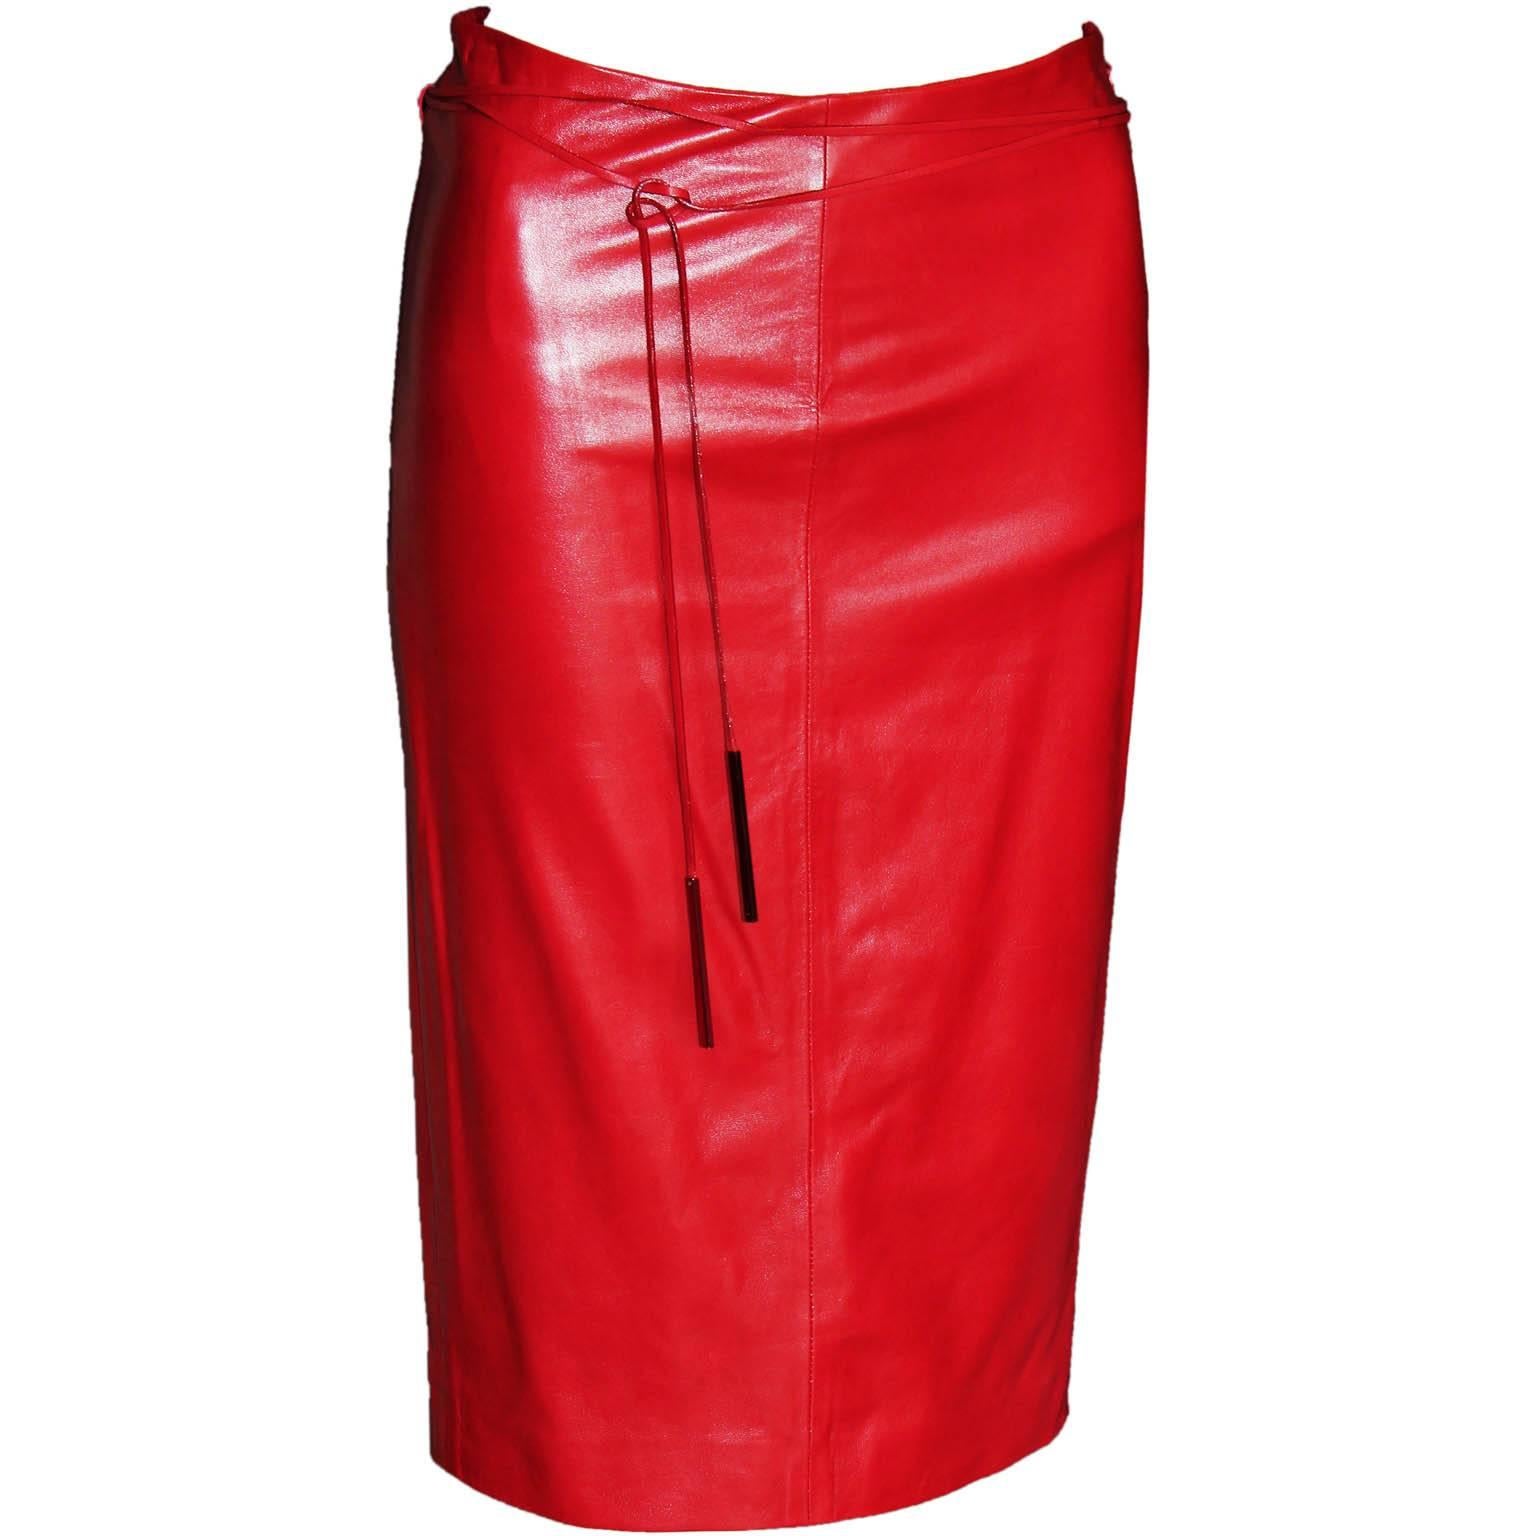 Free Shipping: Heavenly Tom Ford For Gucci FW 1997 Red Leather Skirt & Belt! 38